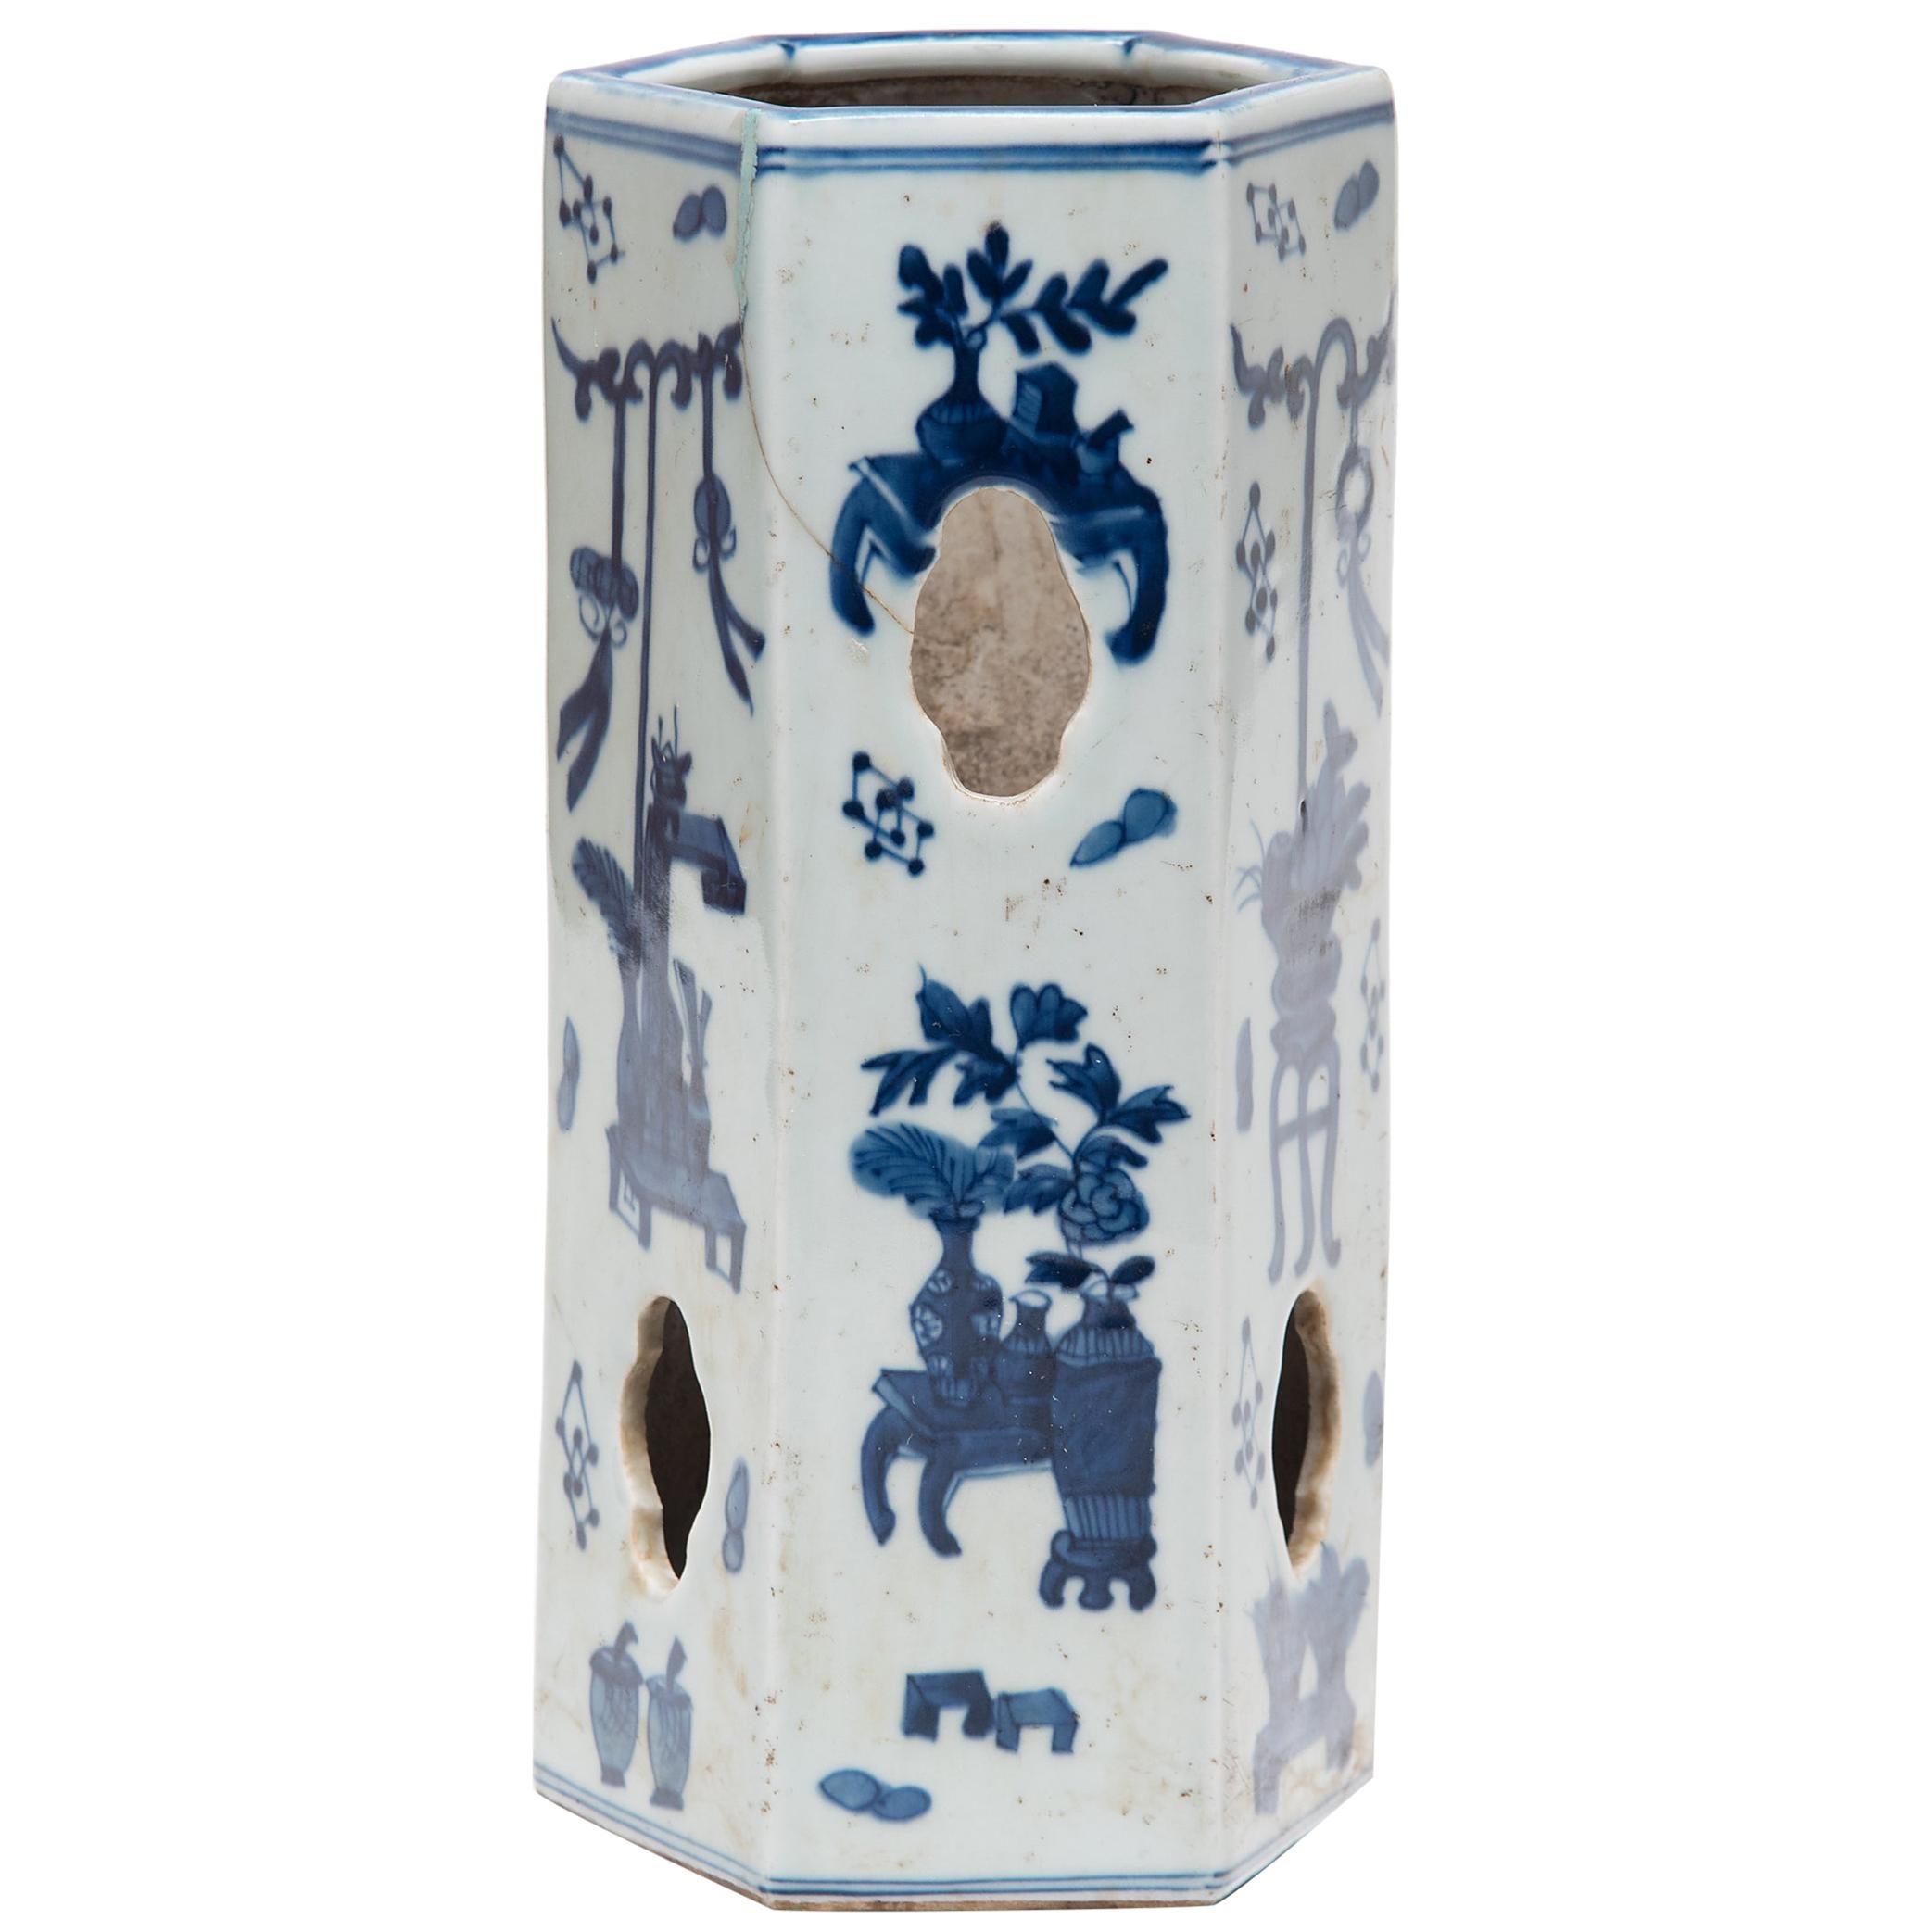 Chinese Blue and White Hat Stand with Treasured Objects, c. 1850